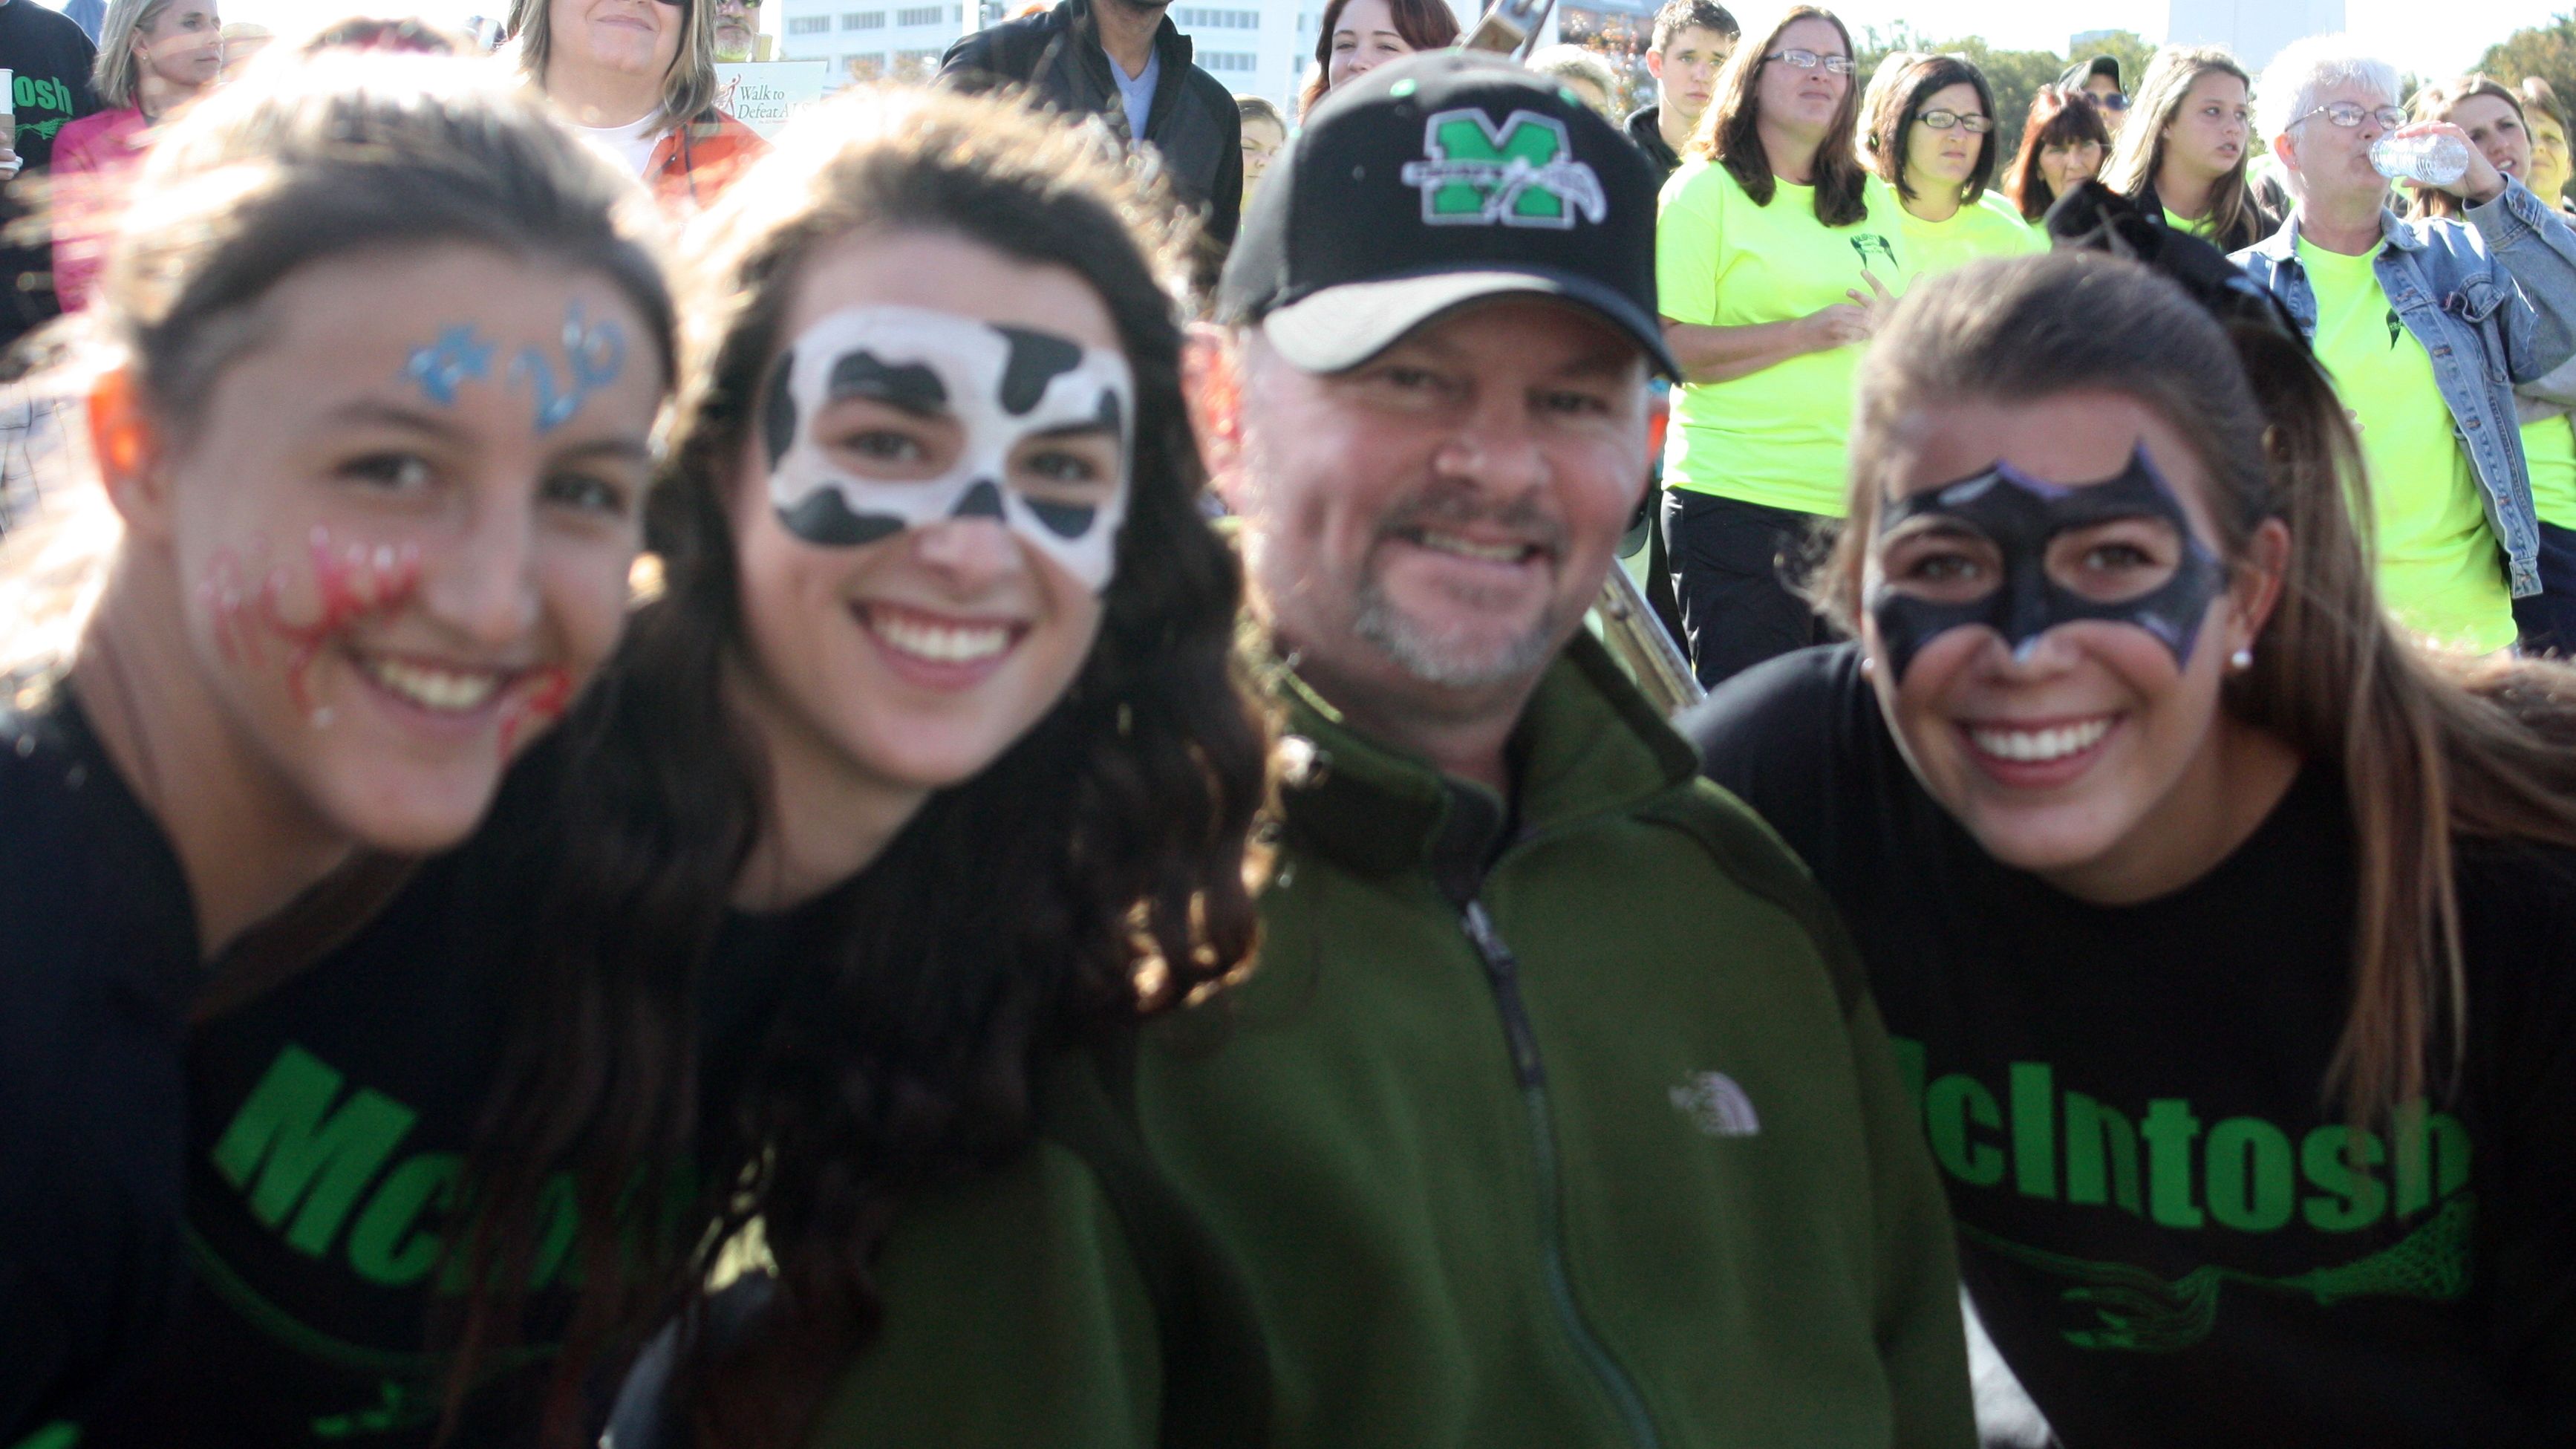 The girls often paint their faces for fundraising events, to  show their spirit and to keep Coach Mickey smiling.